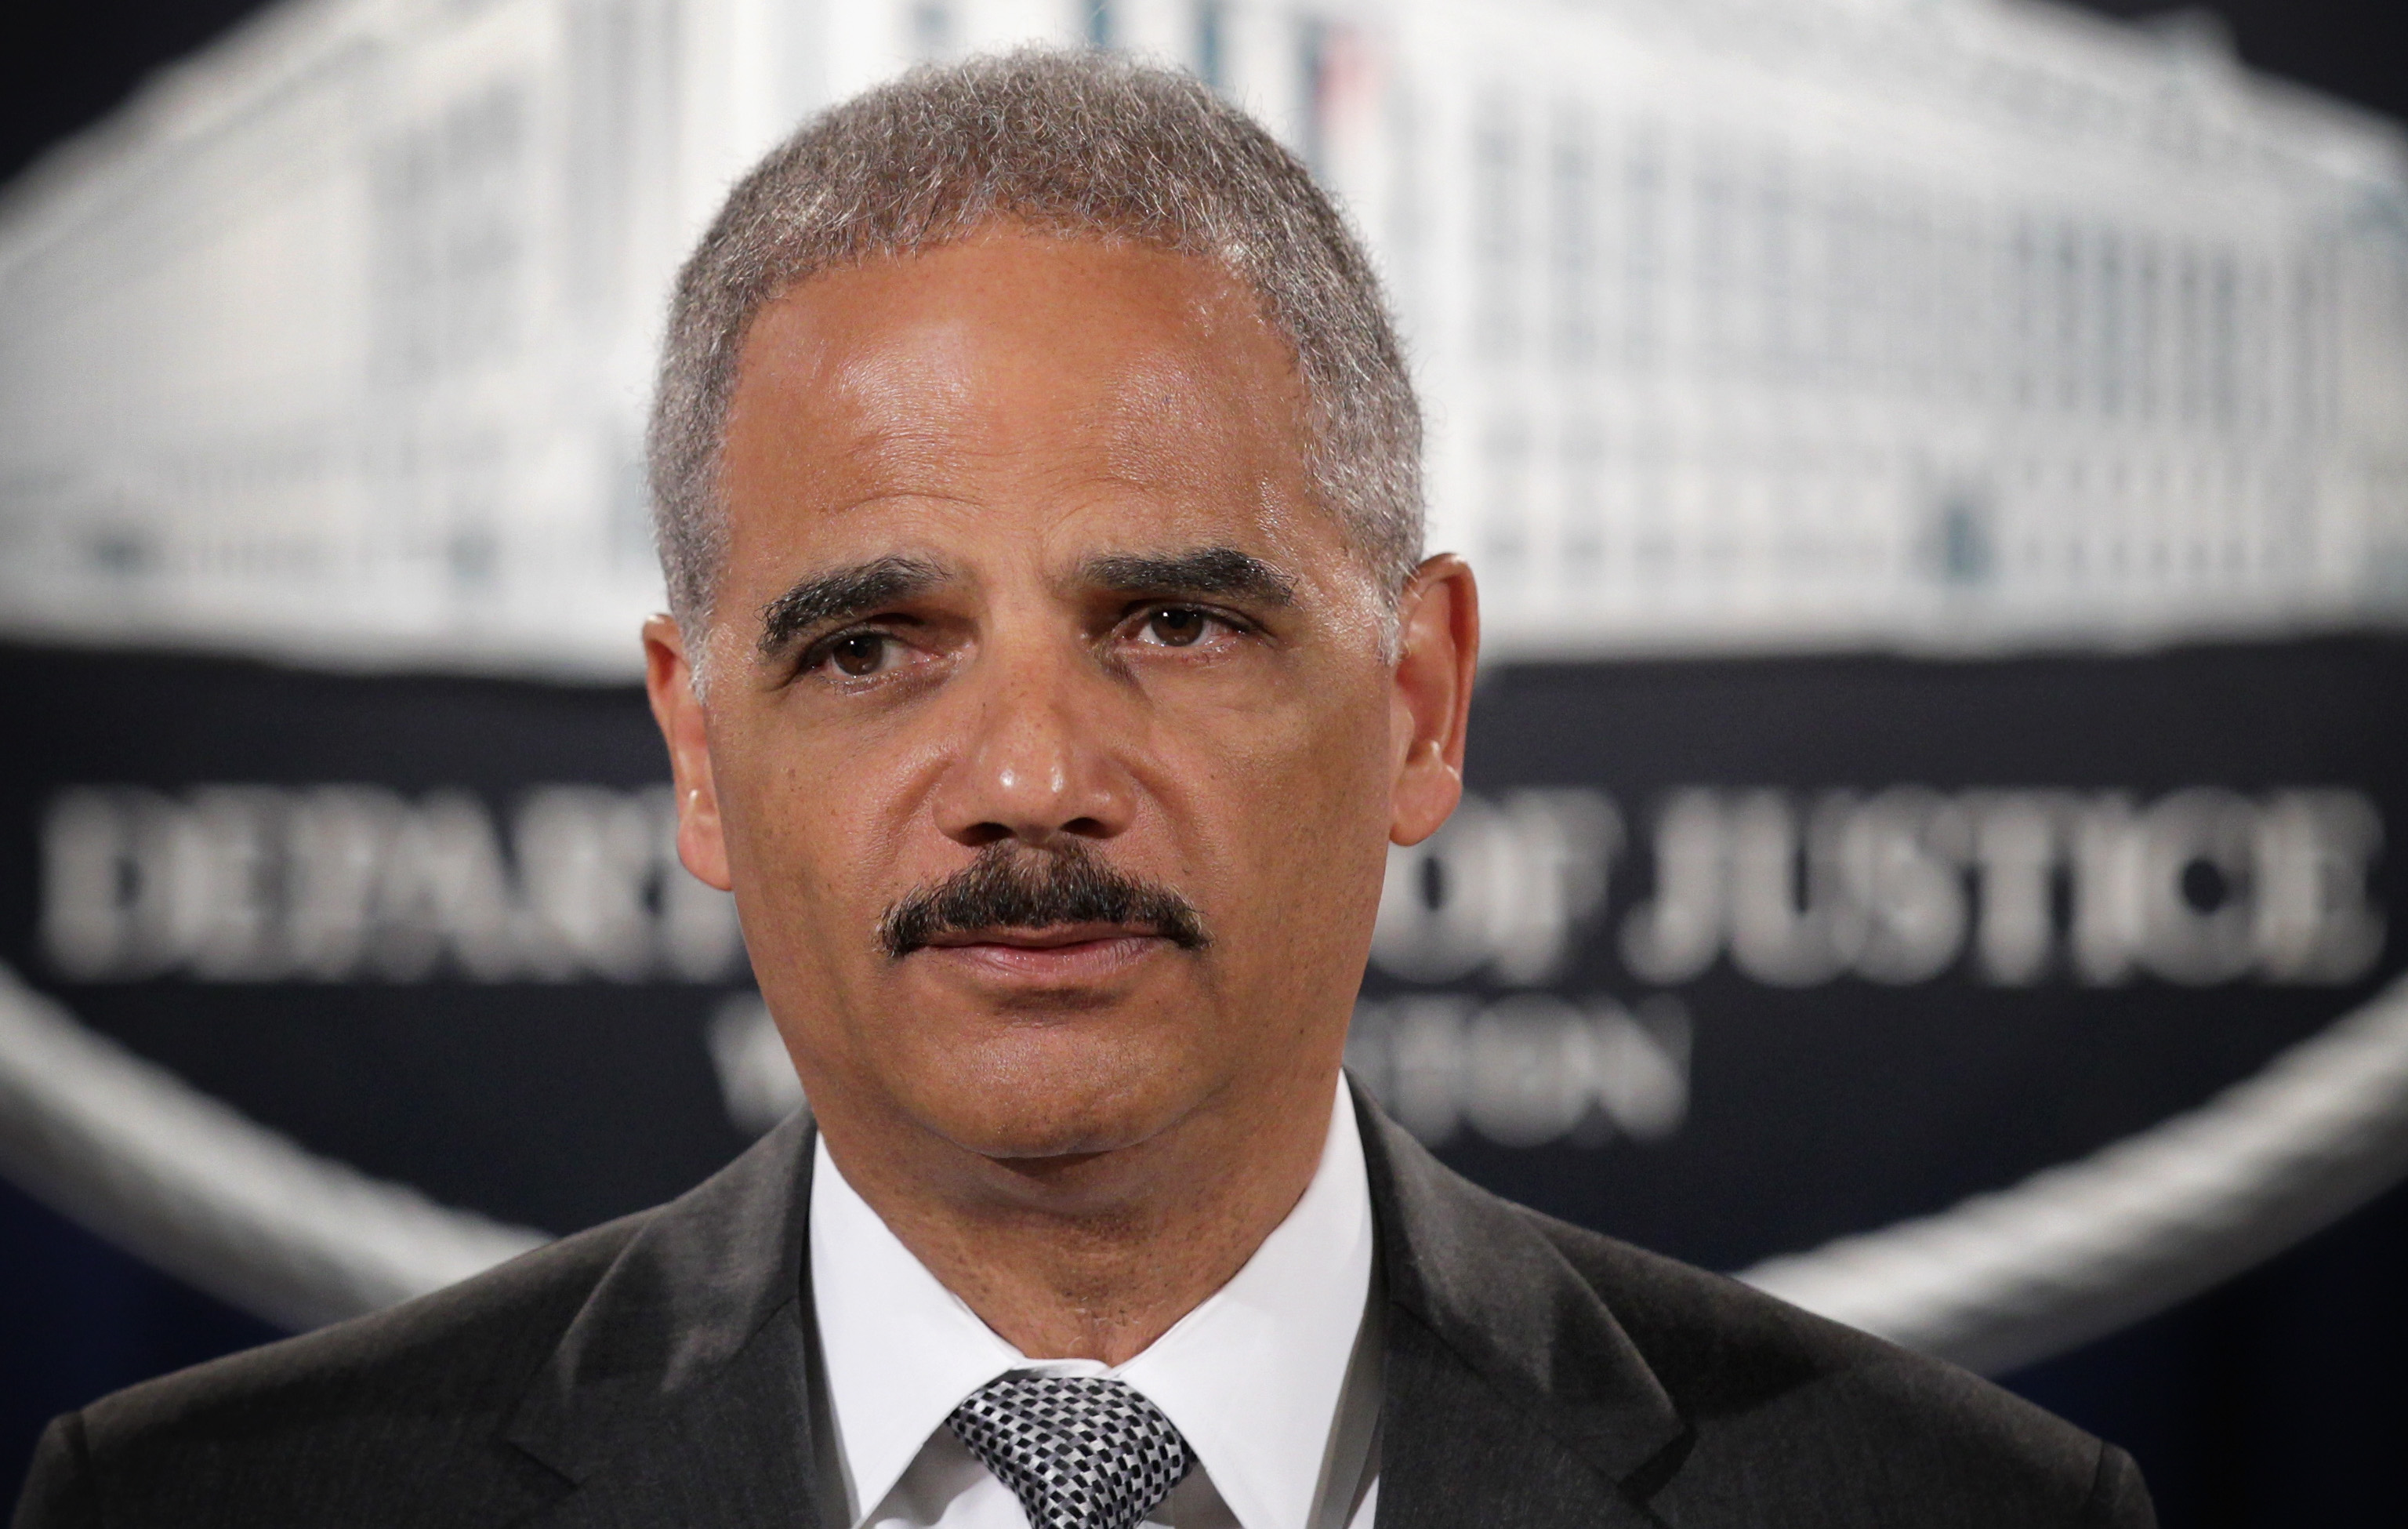 Attorney General Eric Holder makes a separated during a major financial fraud announcement press conference on Aug. 21, 2014 at the Justice Department in Washington, DC. (Alex Wong—Getty Images)